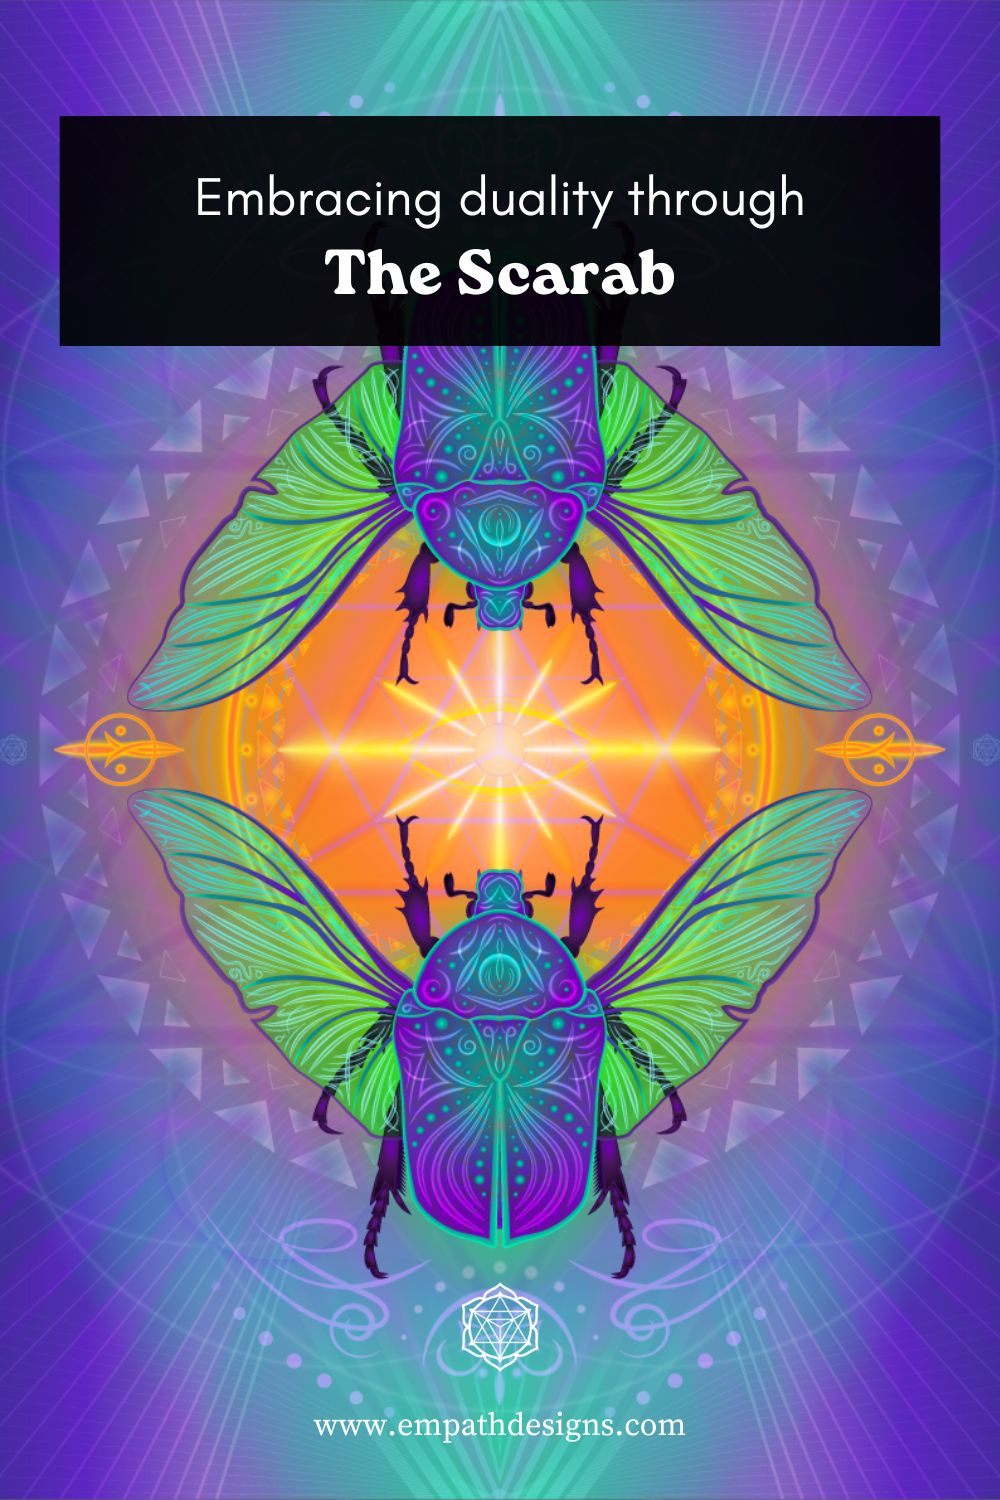 Embracing Duality Through the Scarab